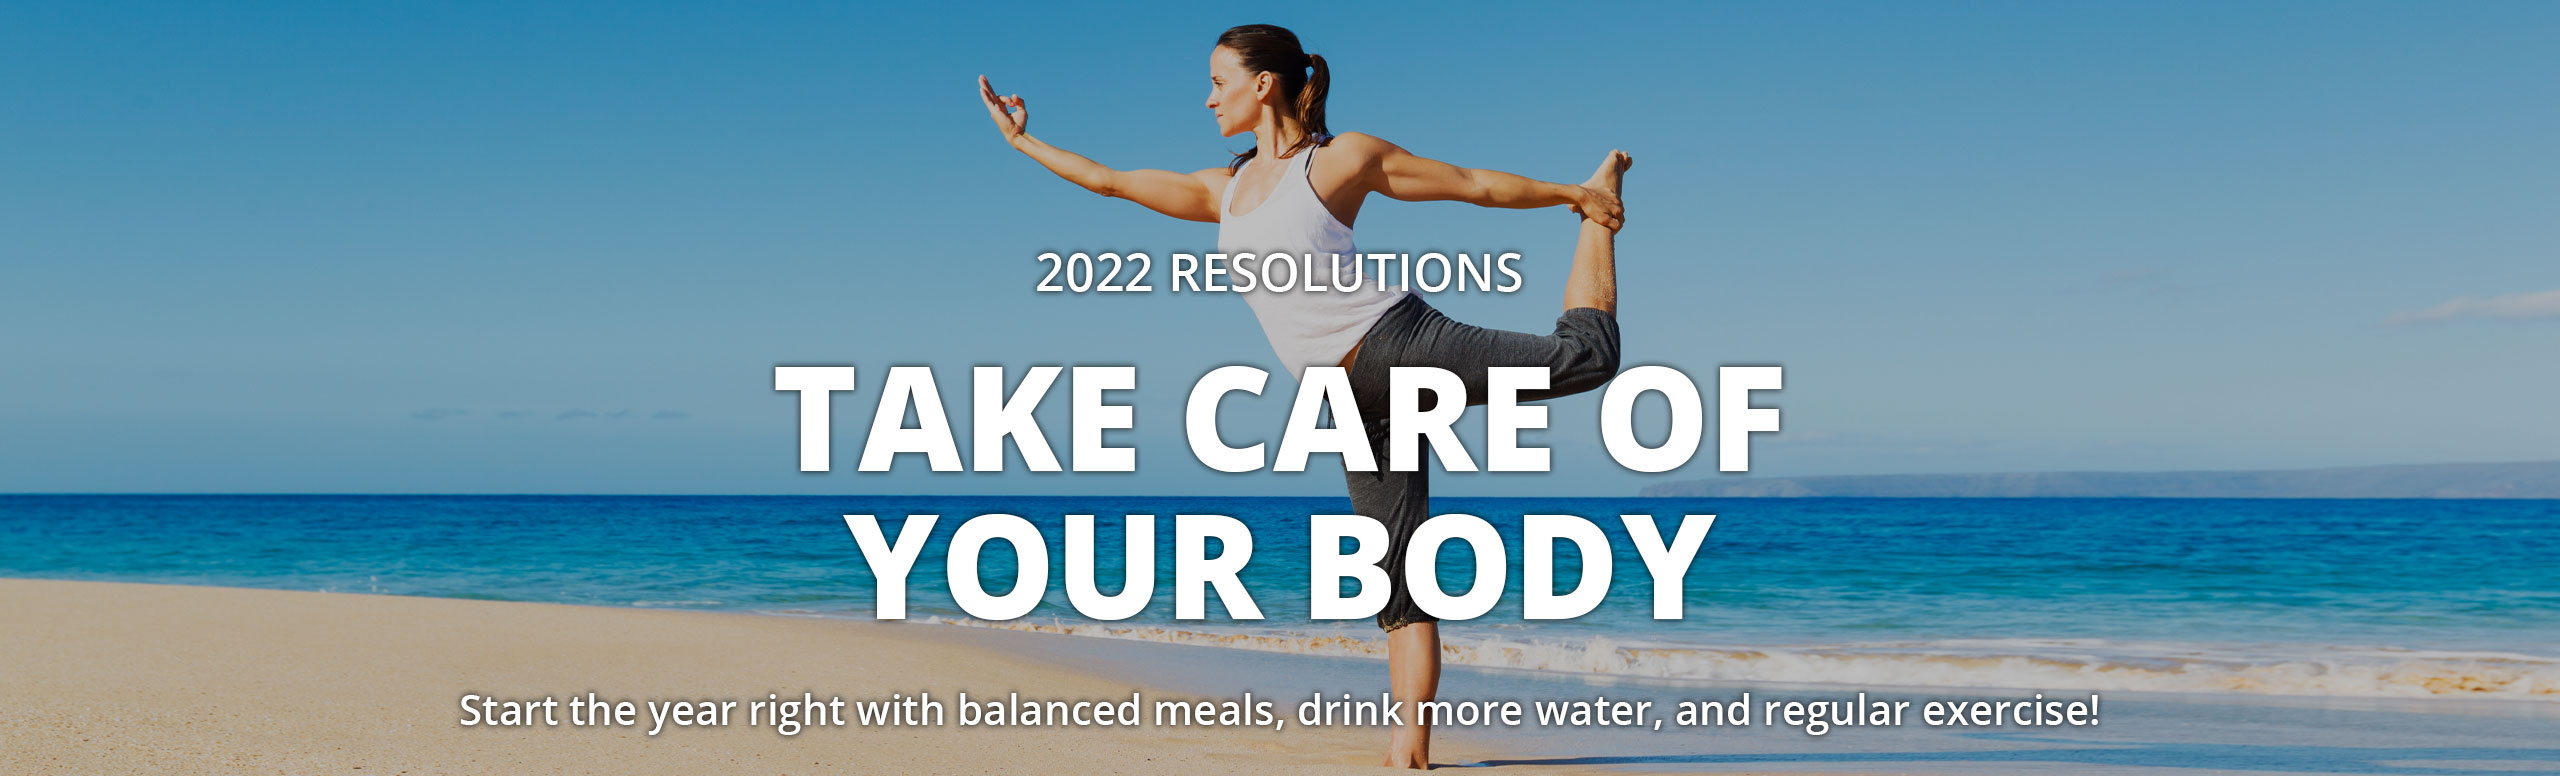 Banner picture of a female doing yoga outside on the beach in the sand next to the calm waves. Banner says:

2022 RESOLUTIONS 
TAKE CARE  OF YOUR BODY

Start the year right with balanced meals, drink more water, and regular exercise!